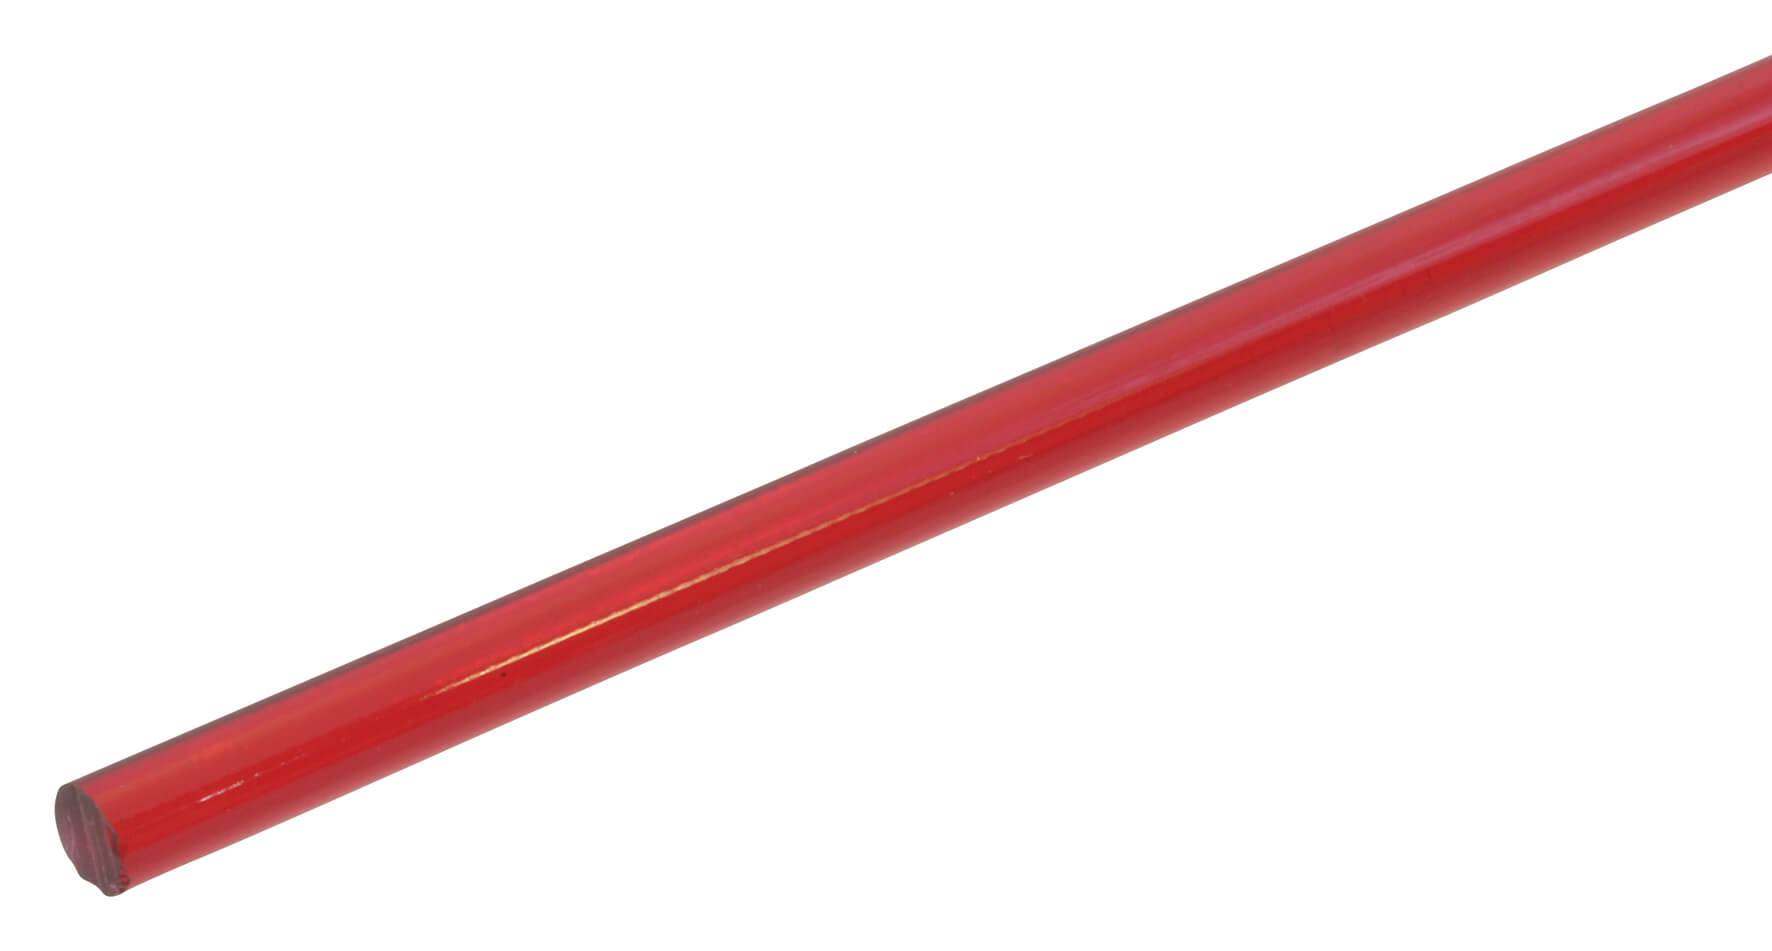 Transparent Acrylic Rod 4.8mm x 610mm  - Red